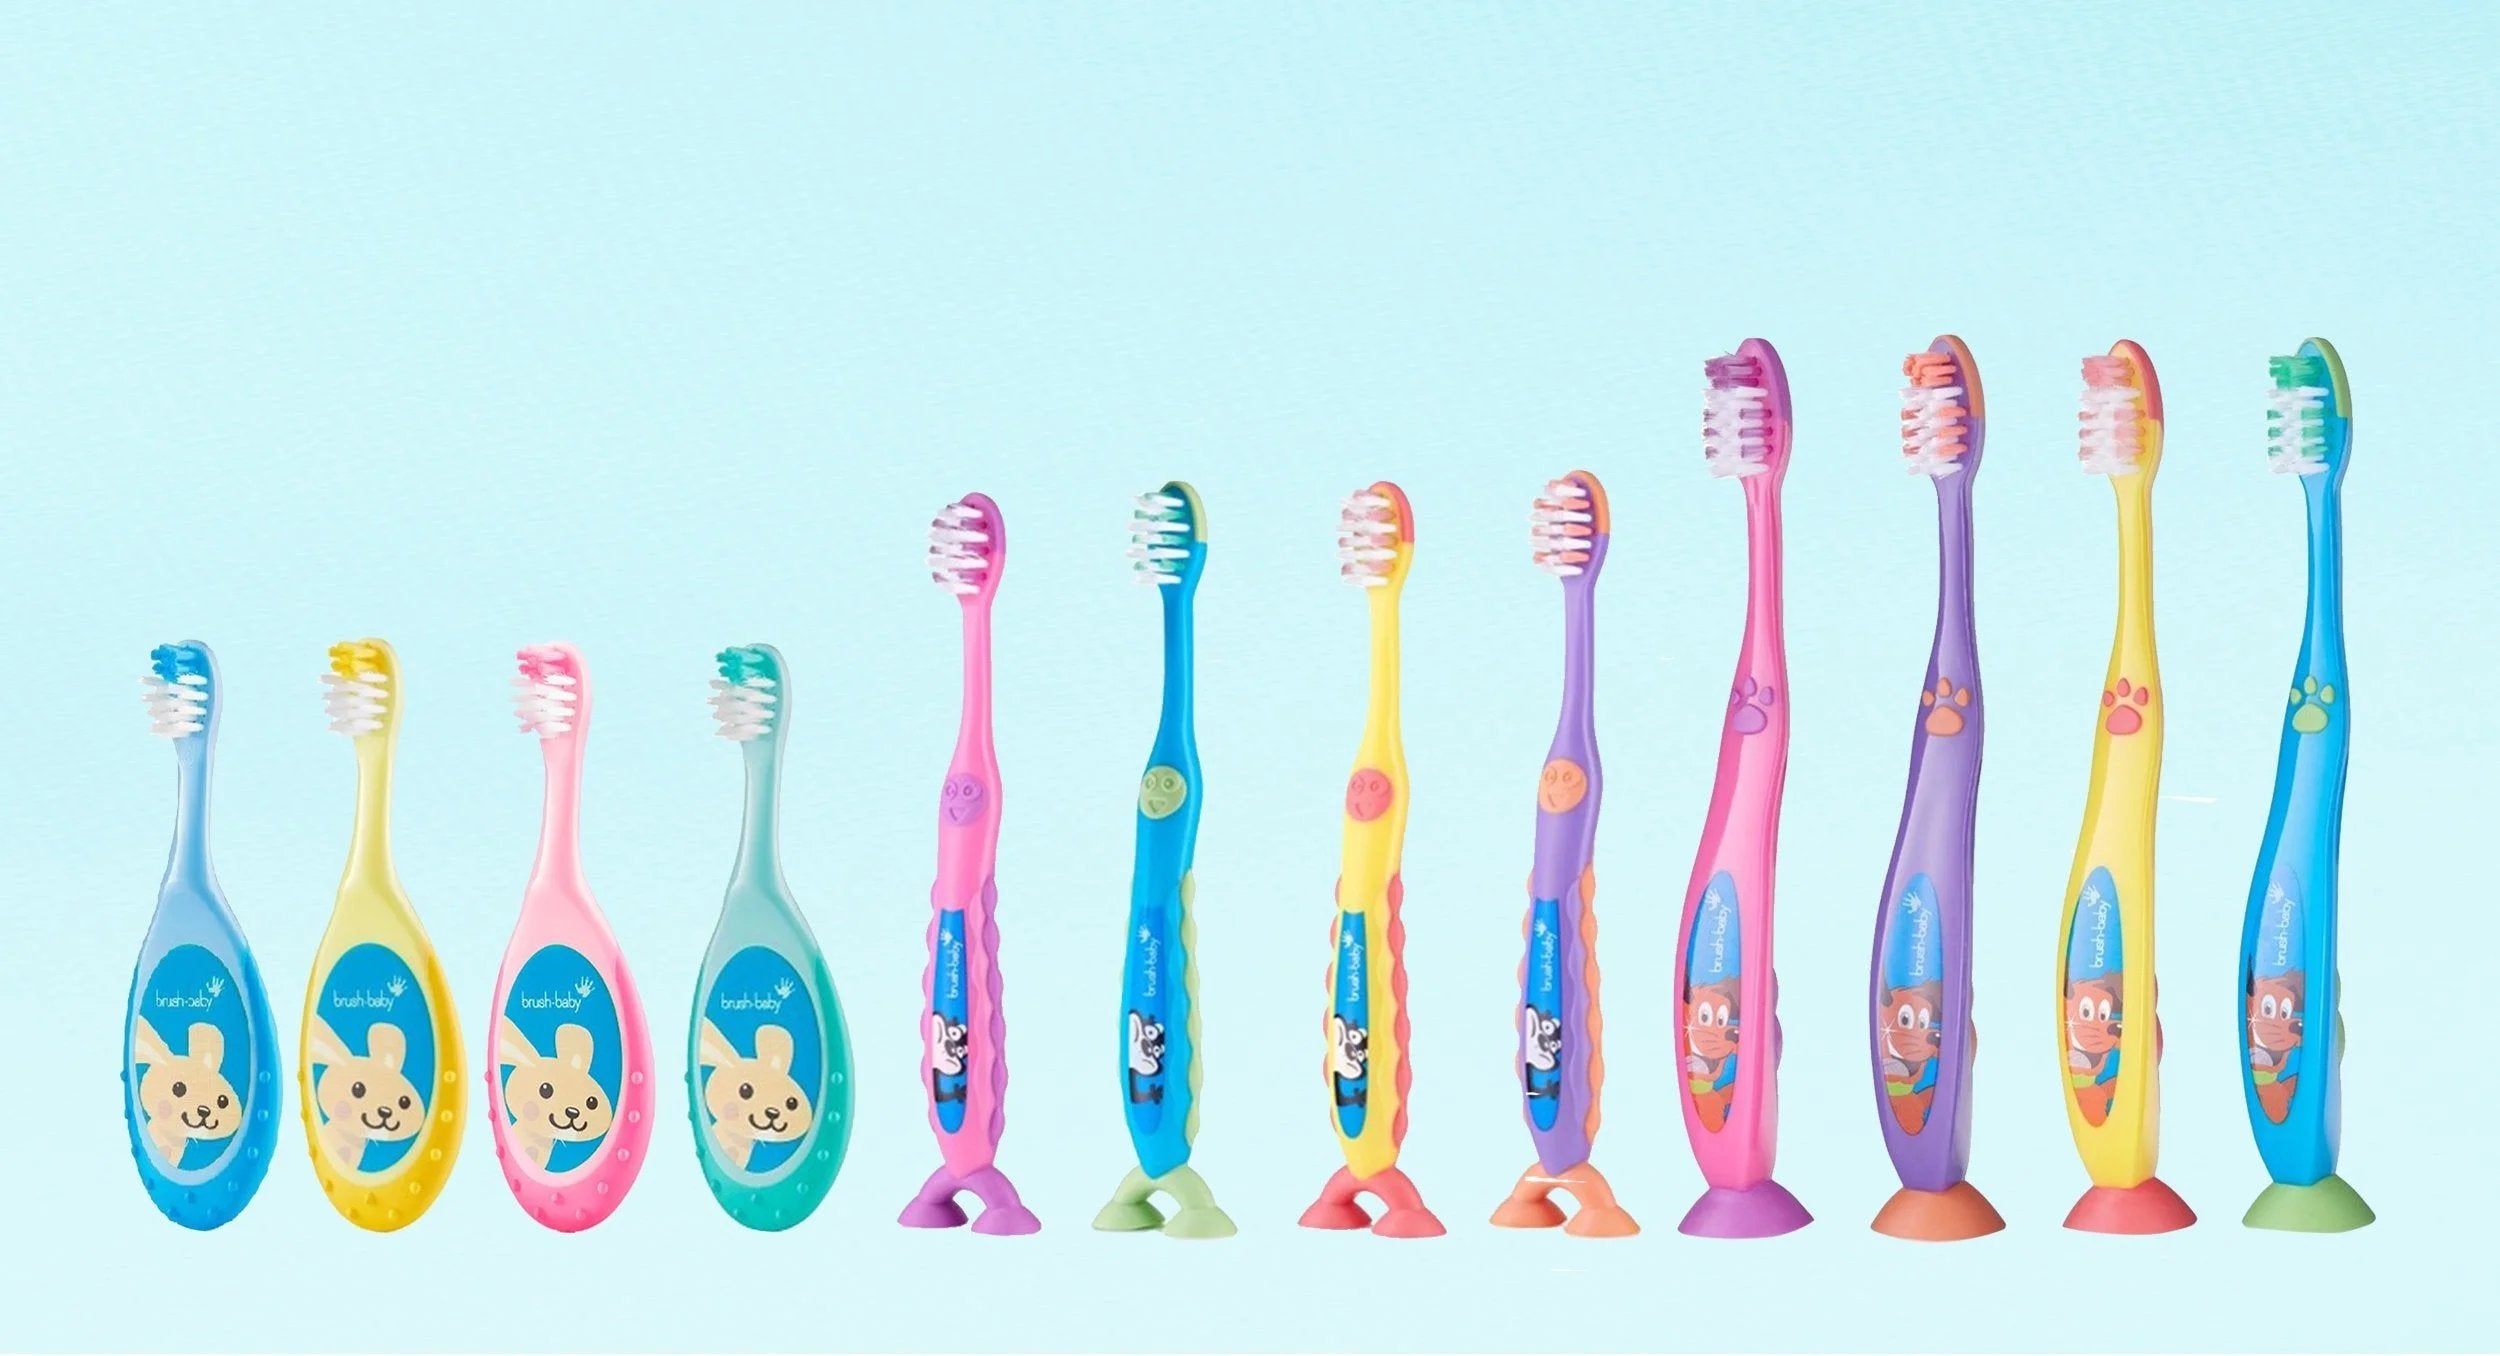 BrushBaby Baby and Toddler Flossbrushes